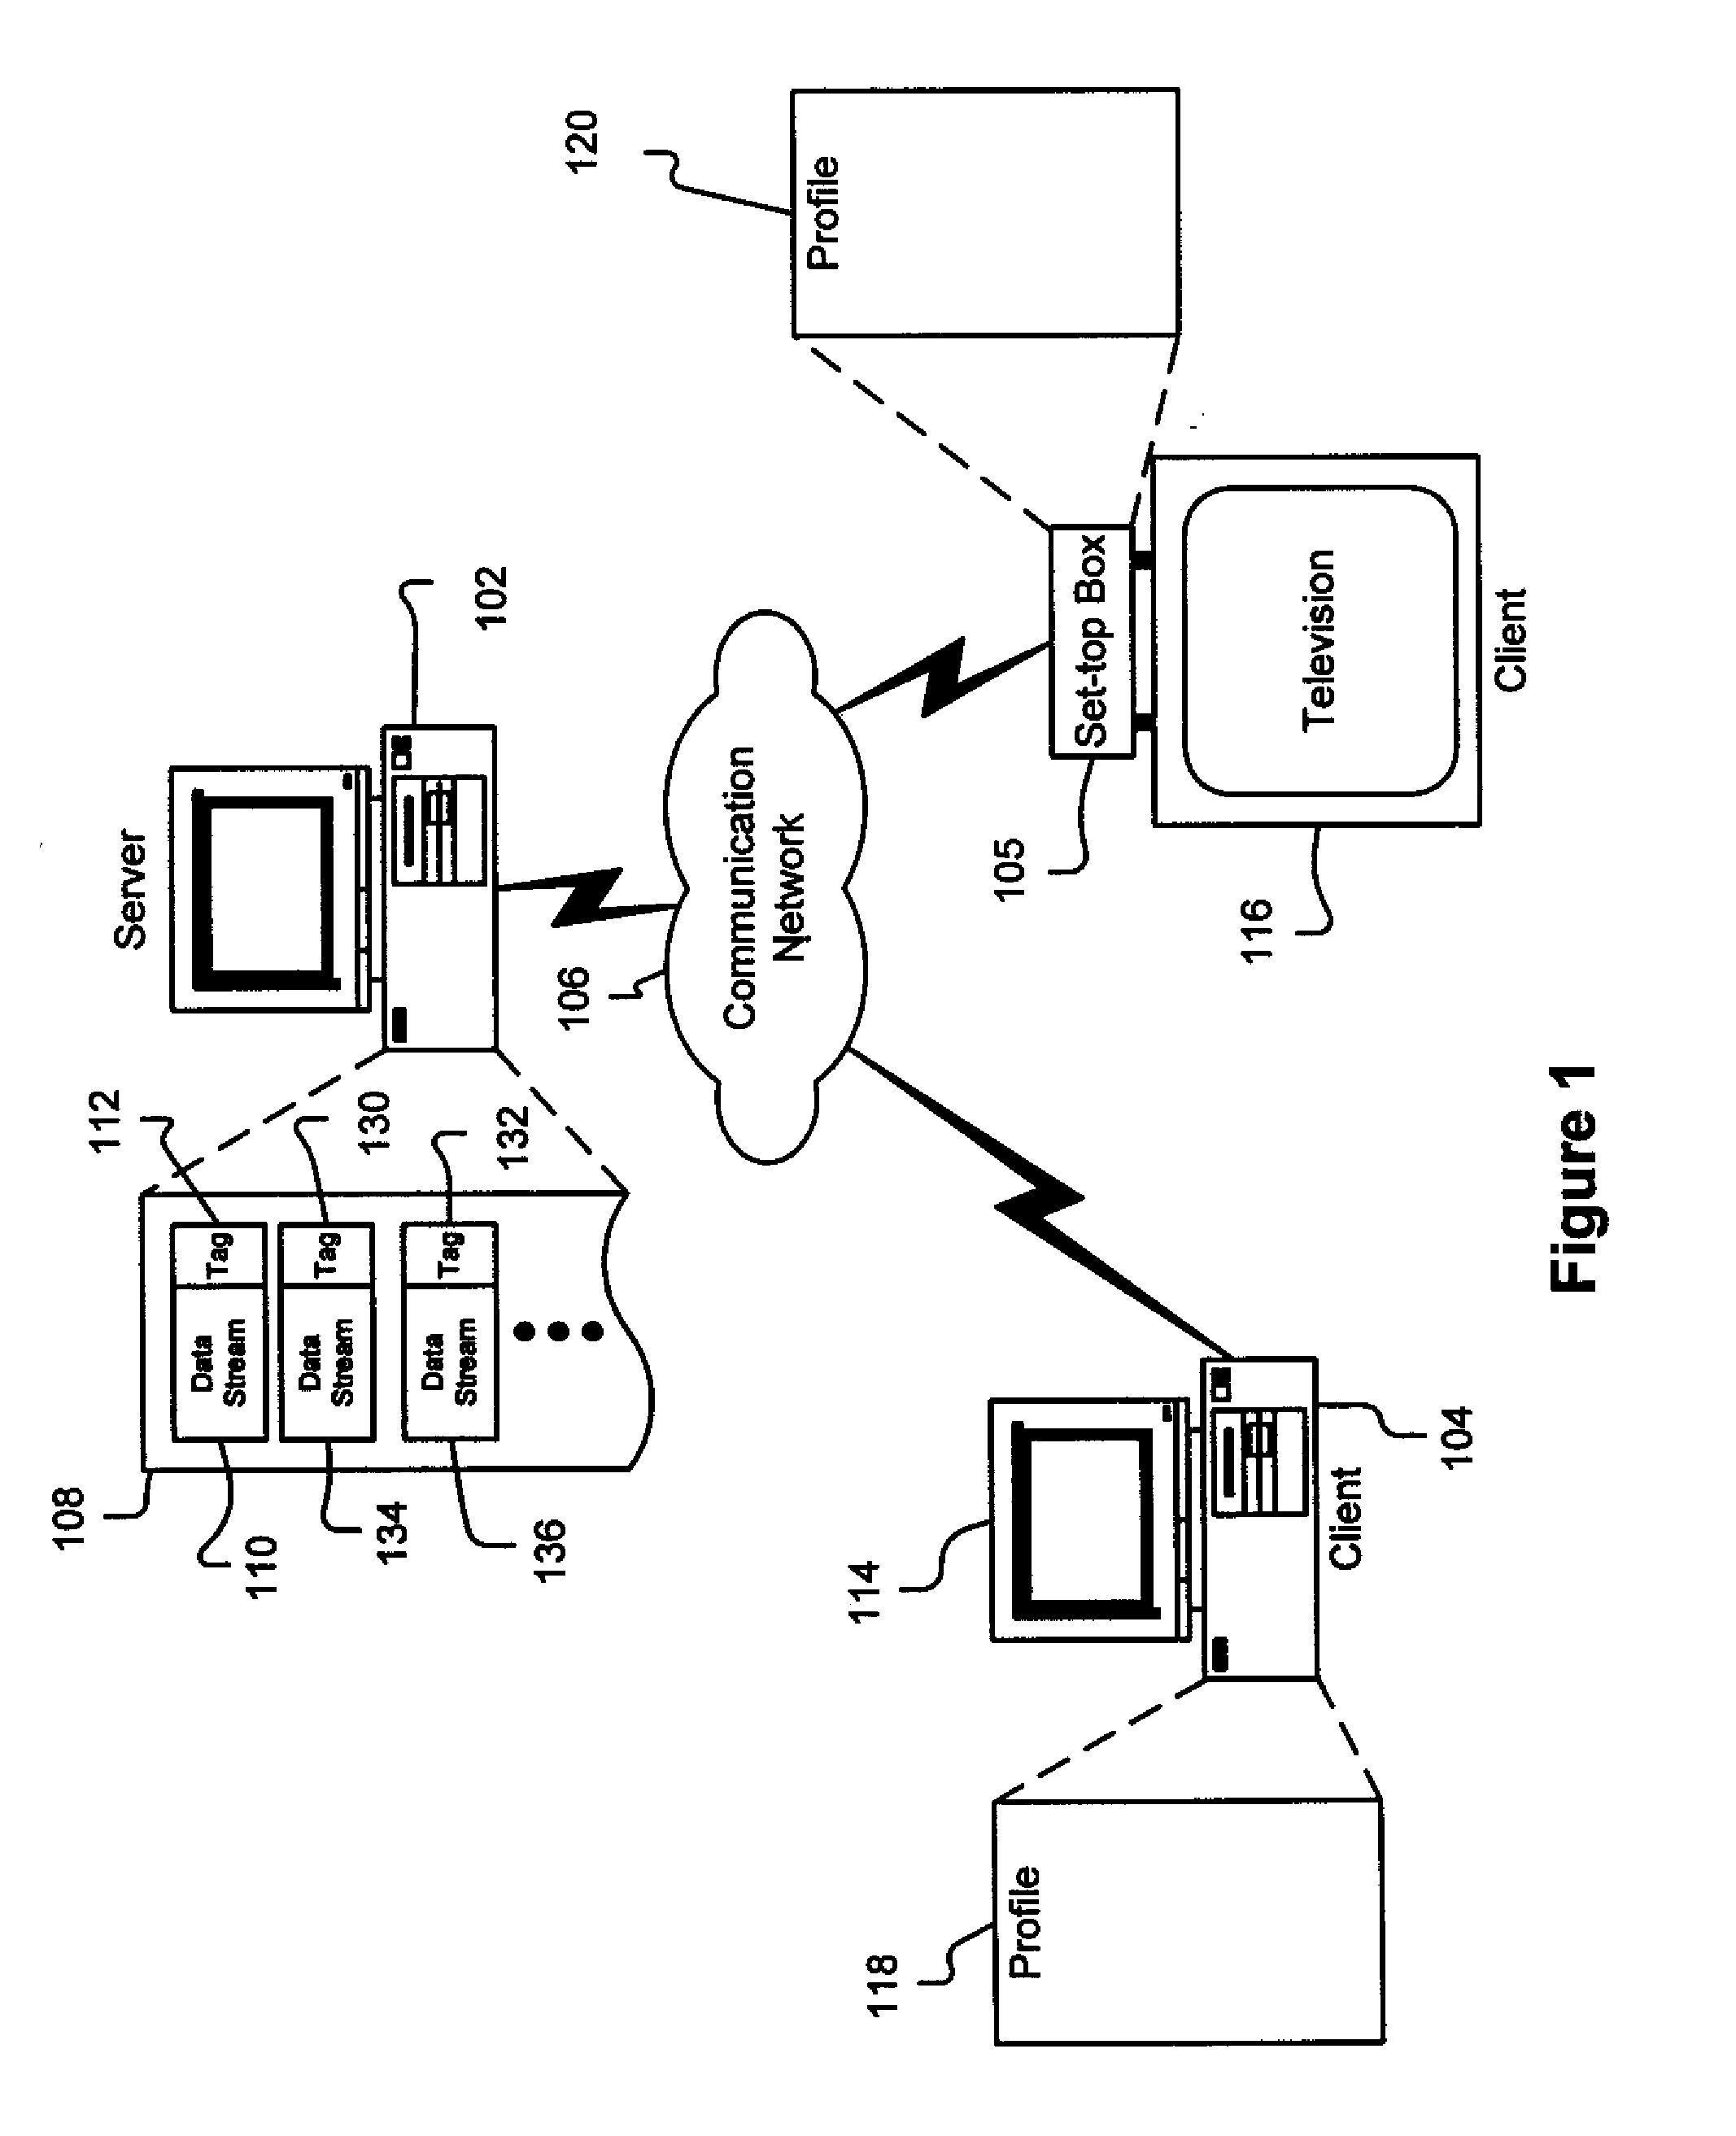 Methods, Systems, and Products for Blocking Content